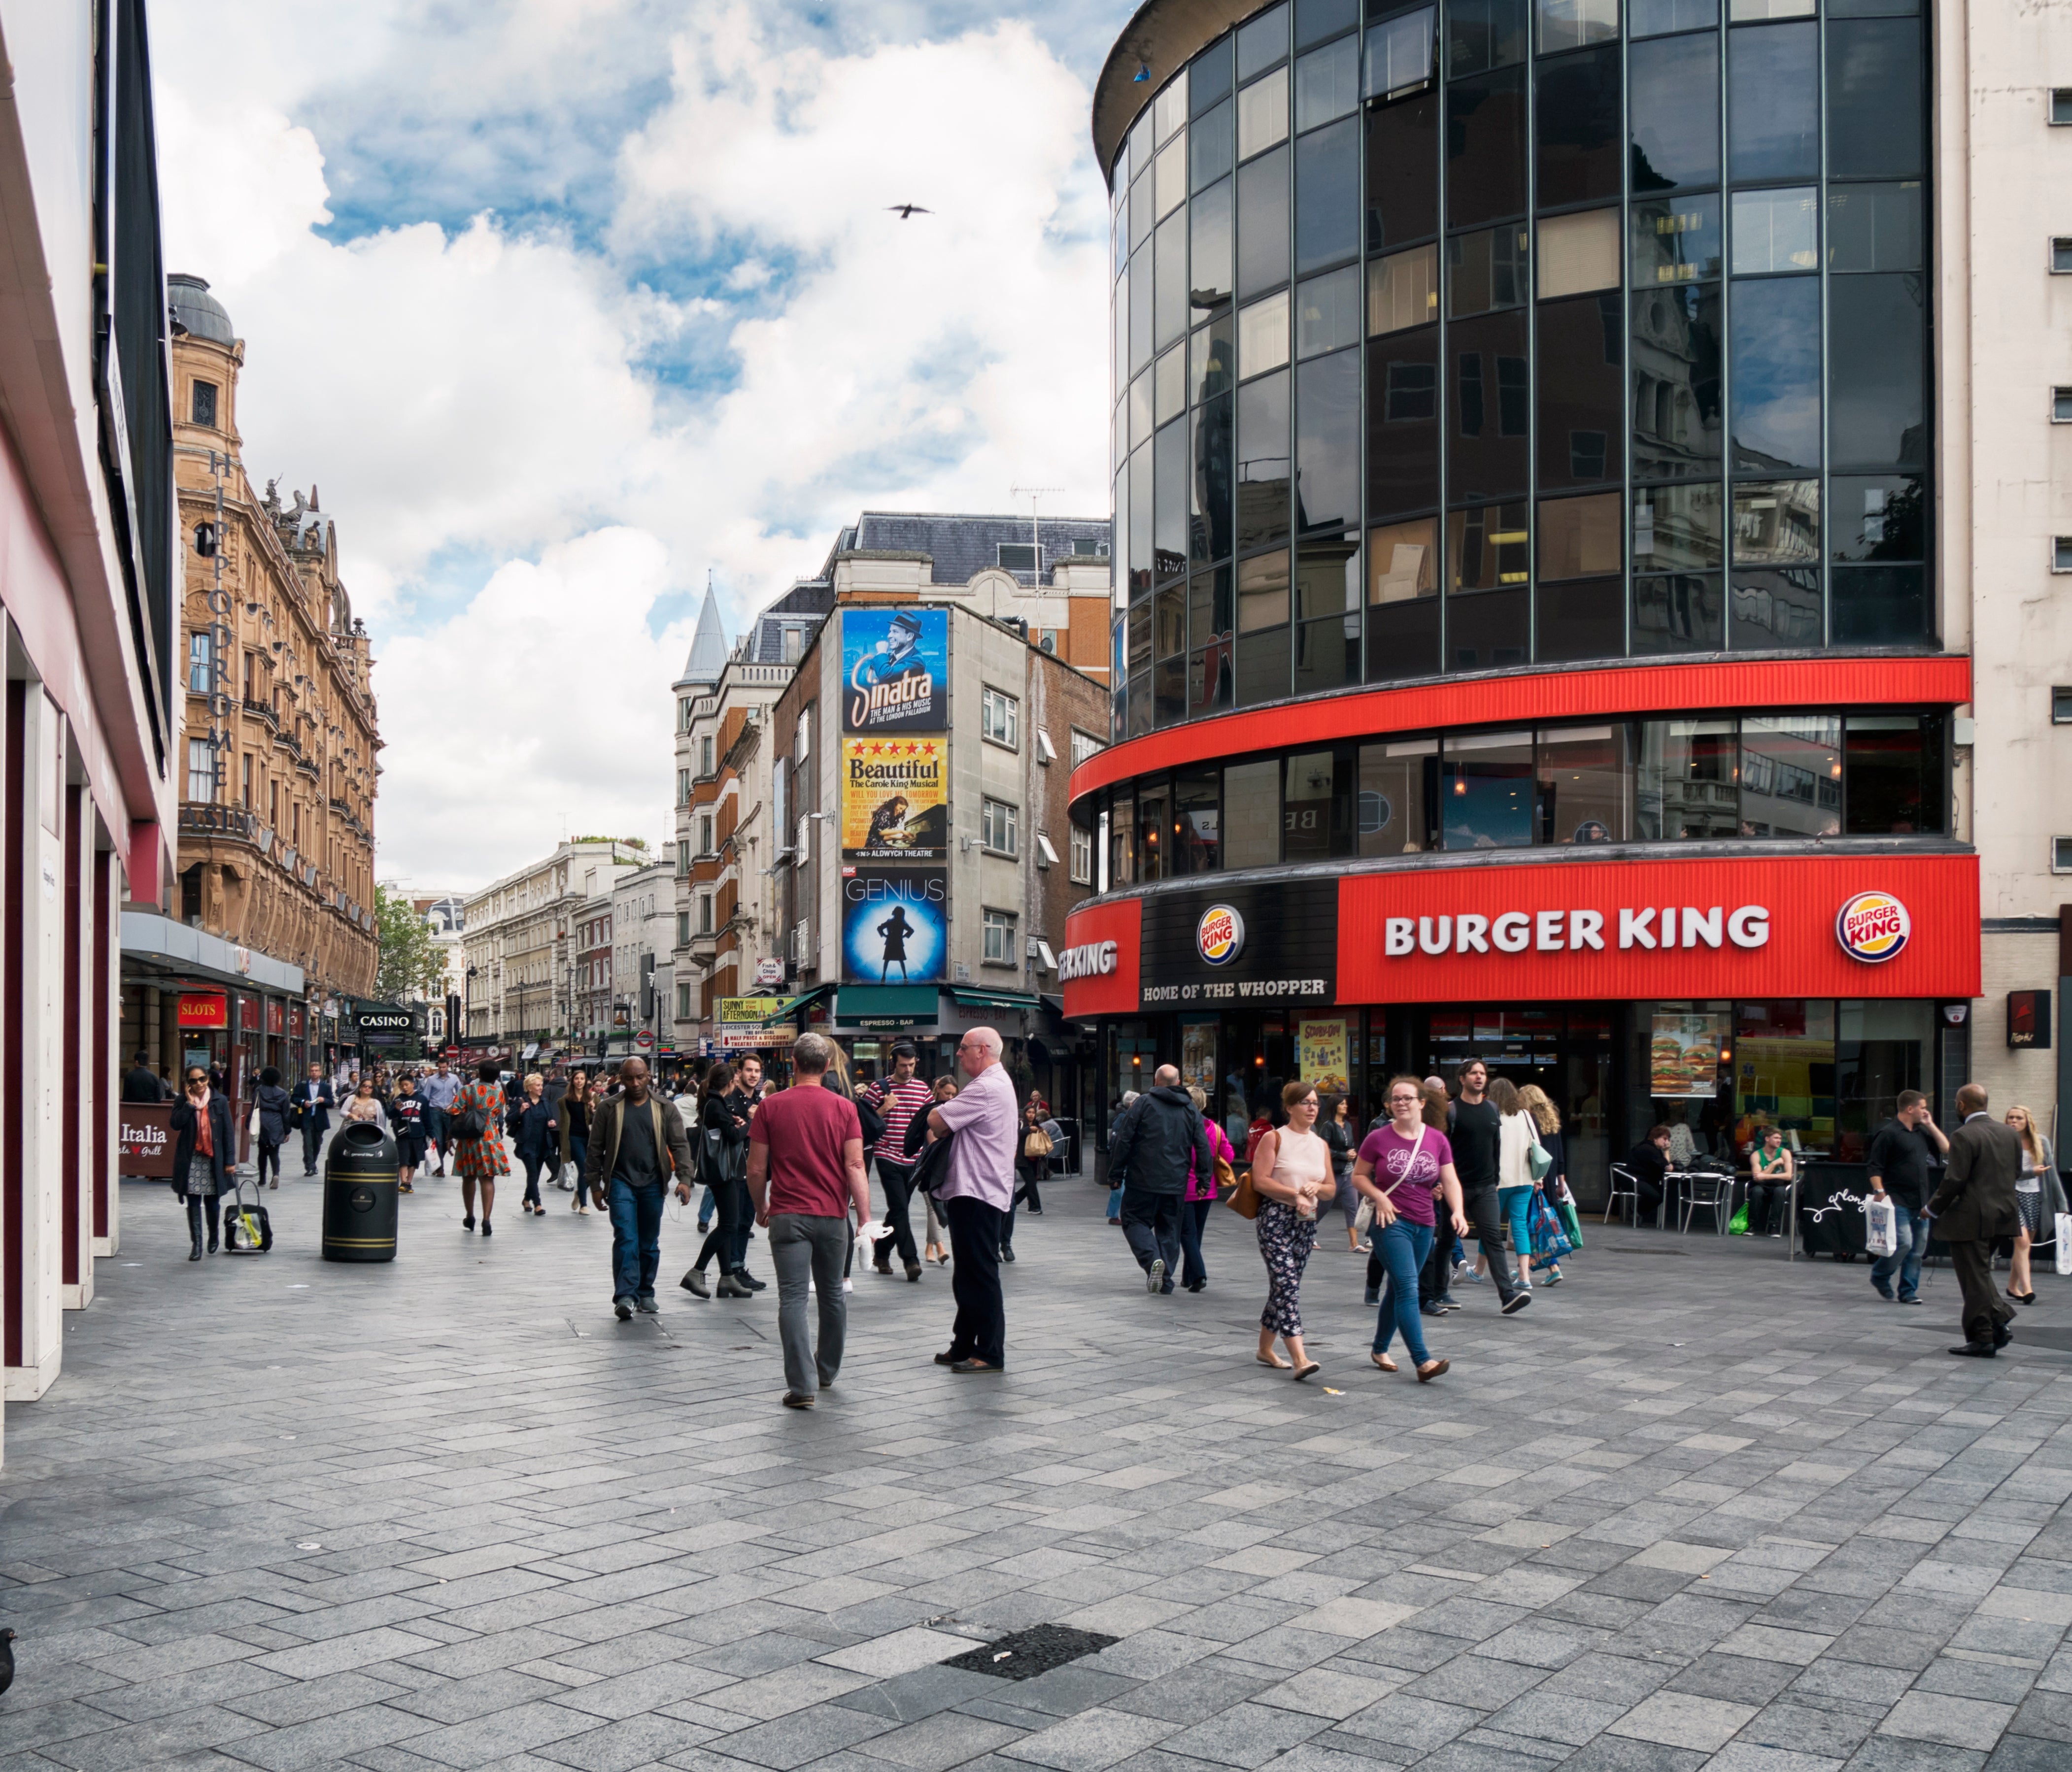 Police were called to a brawl in Leicester Square